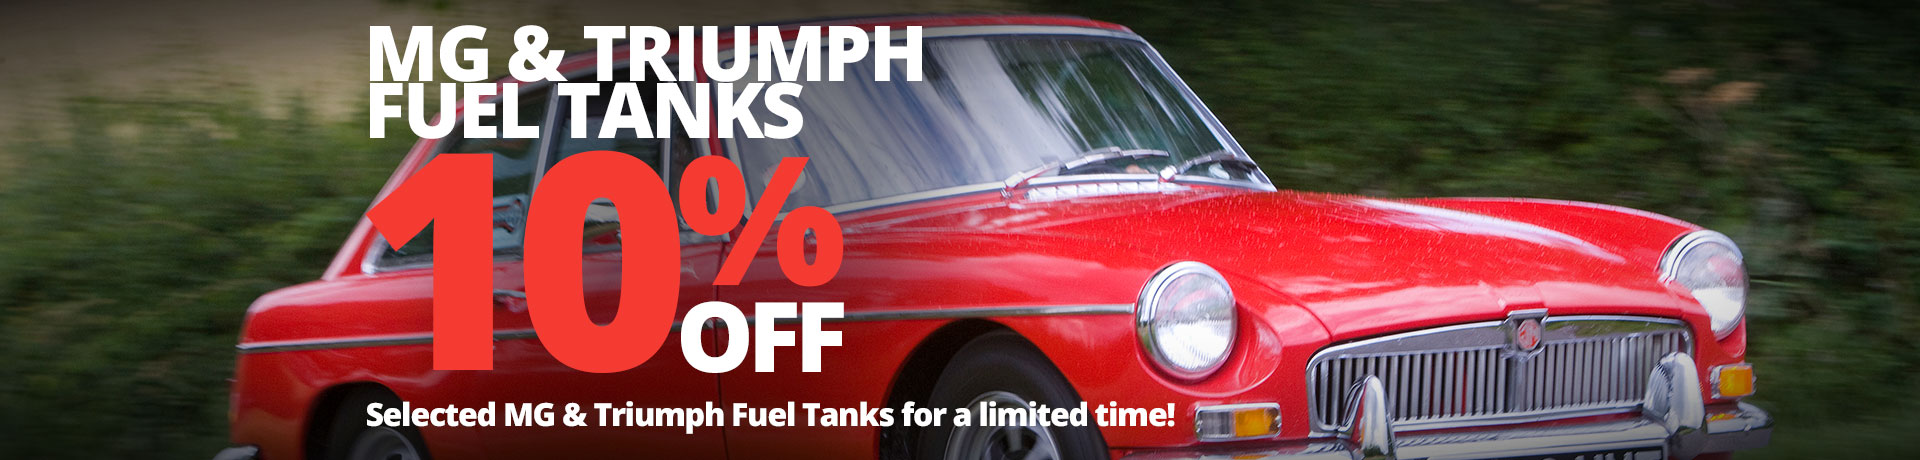 Save Gallons with a New Fuel Tank for your Triumph or MG